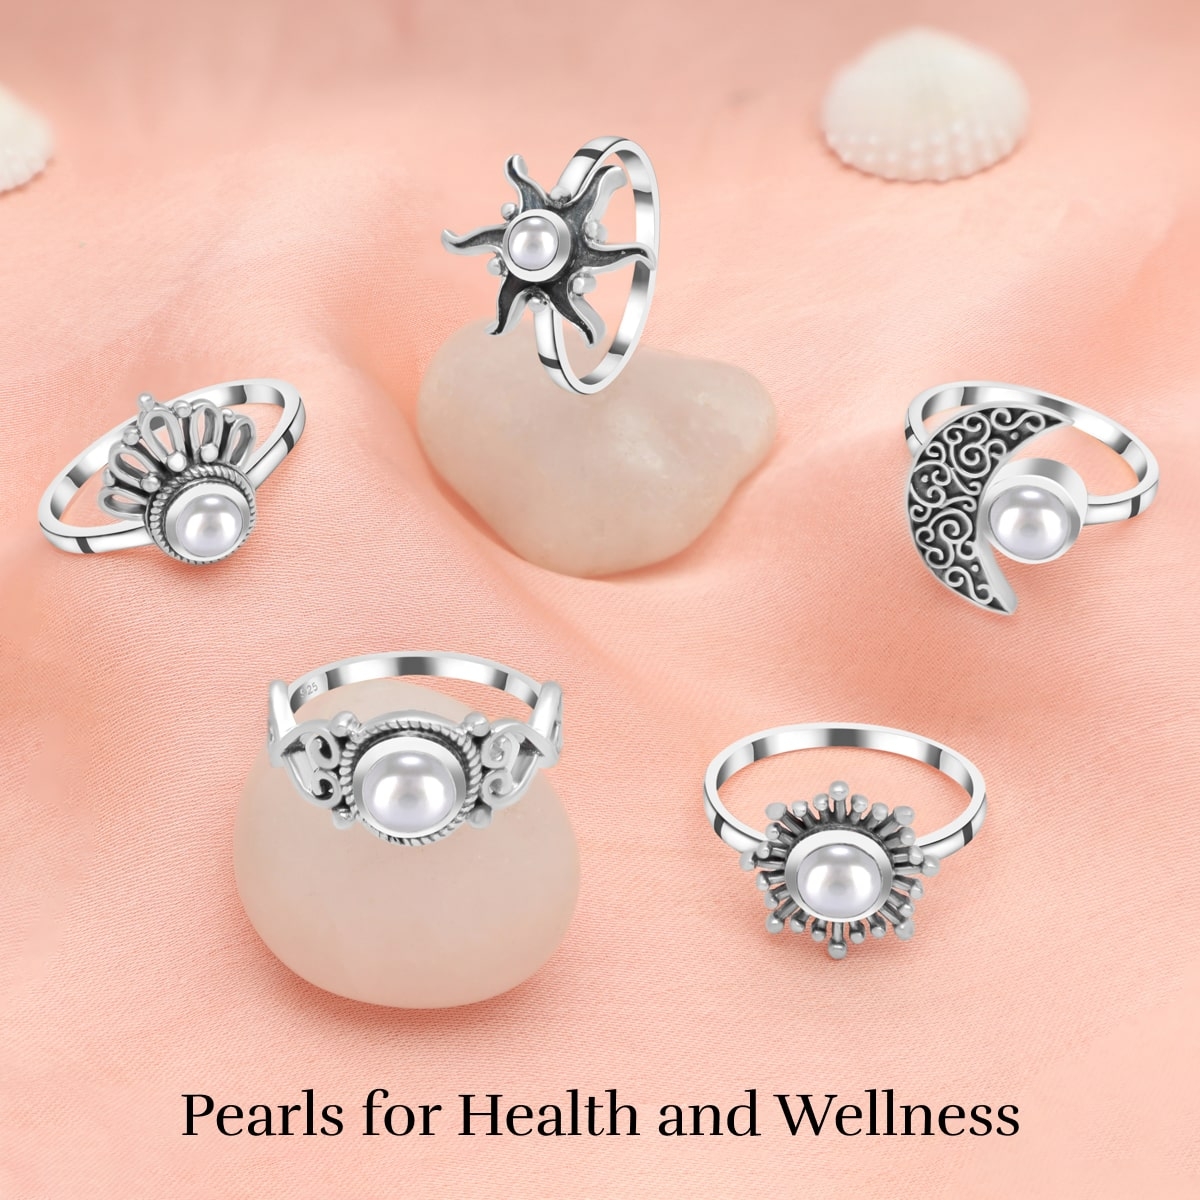 Health Benefits Of Wearing Pearl jewelry